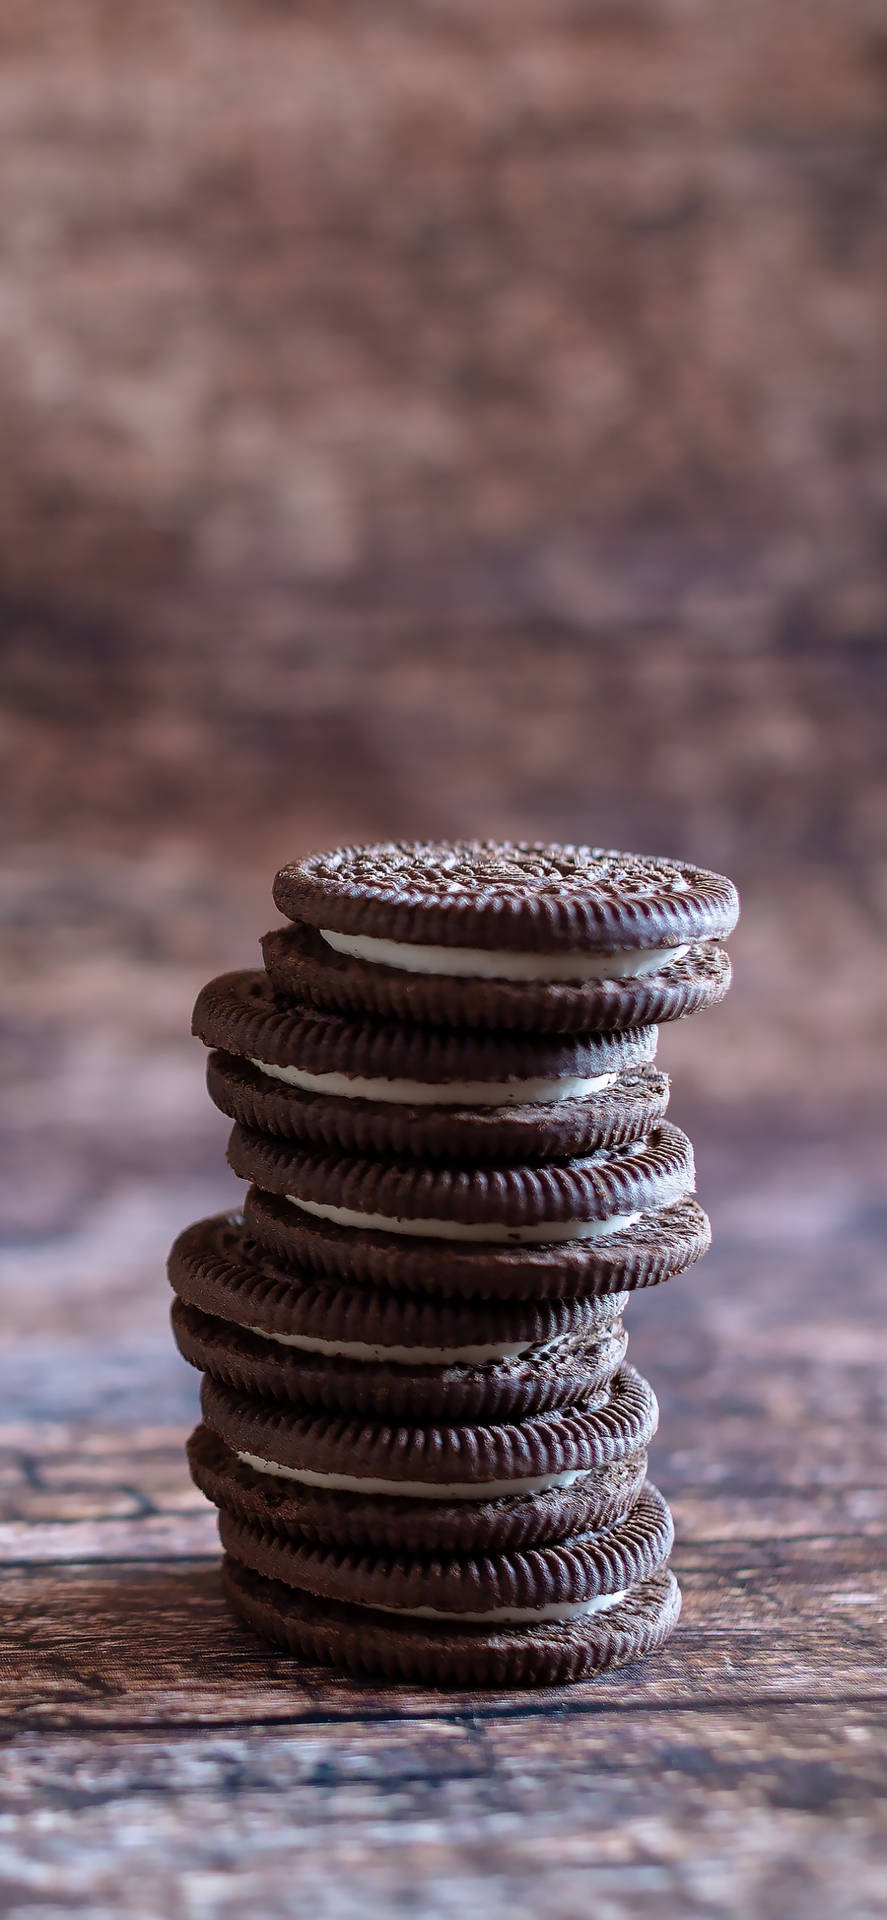 Tower Cookie Iphone Wallpaper